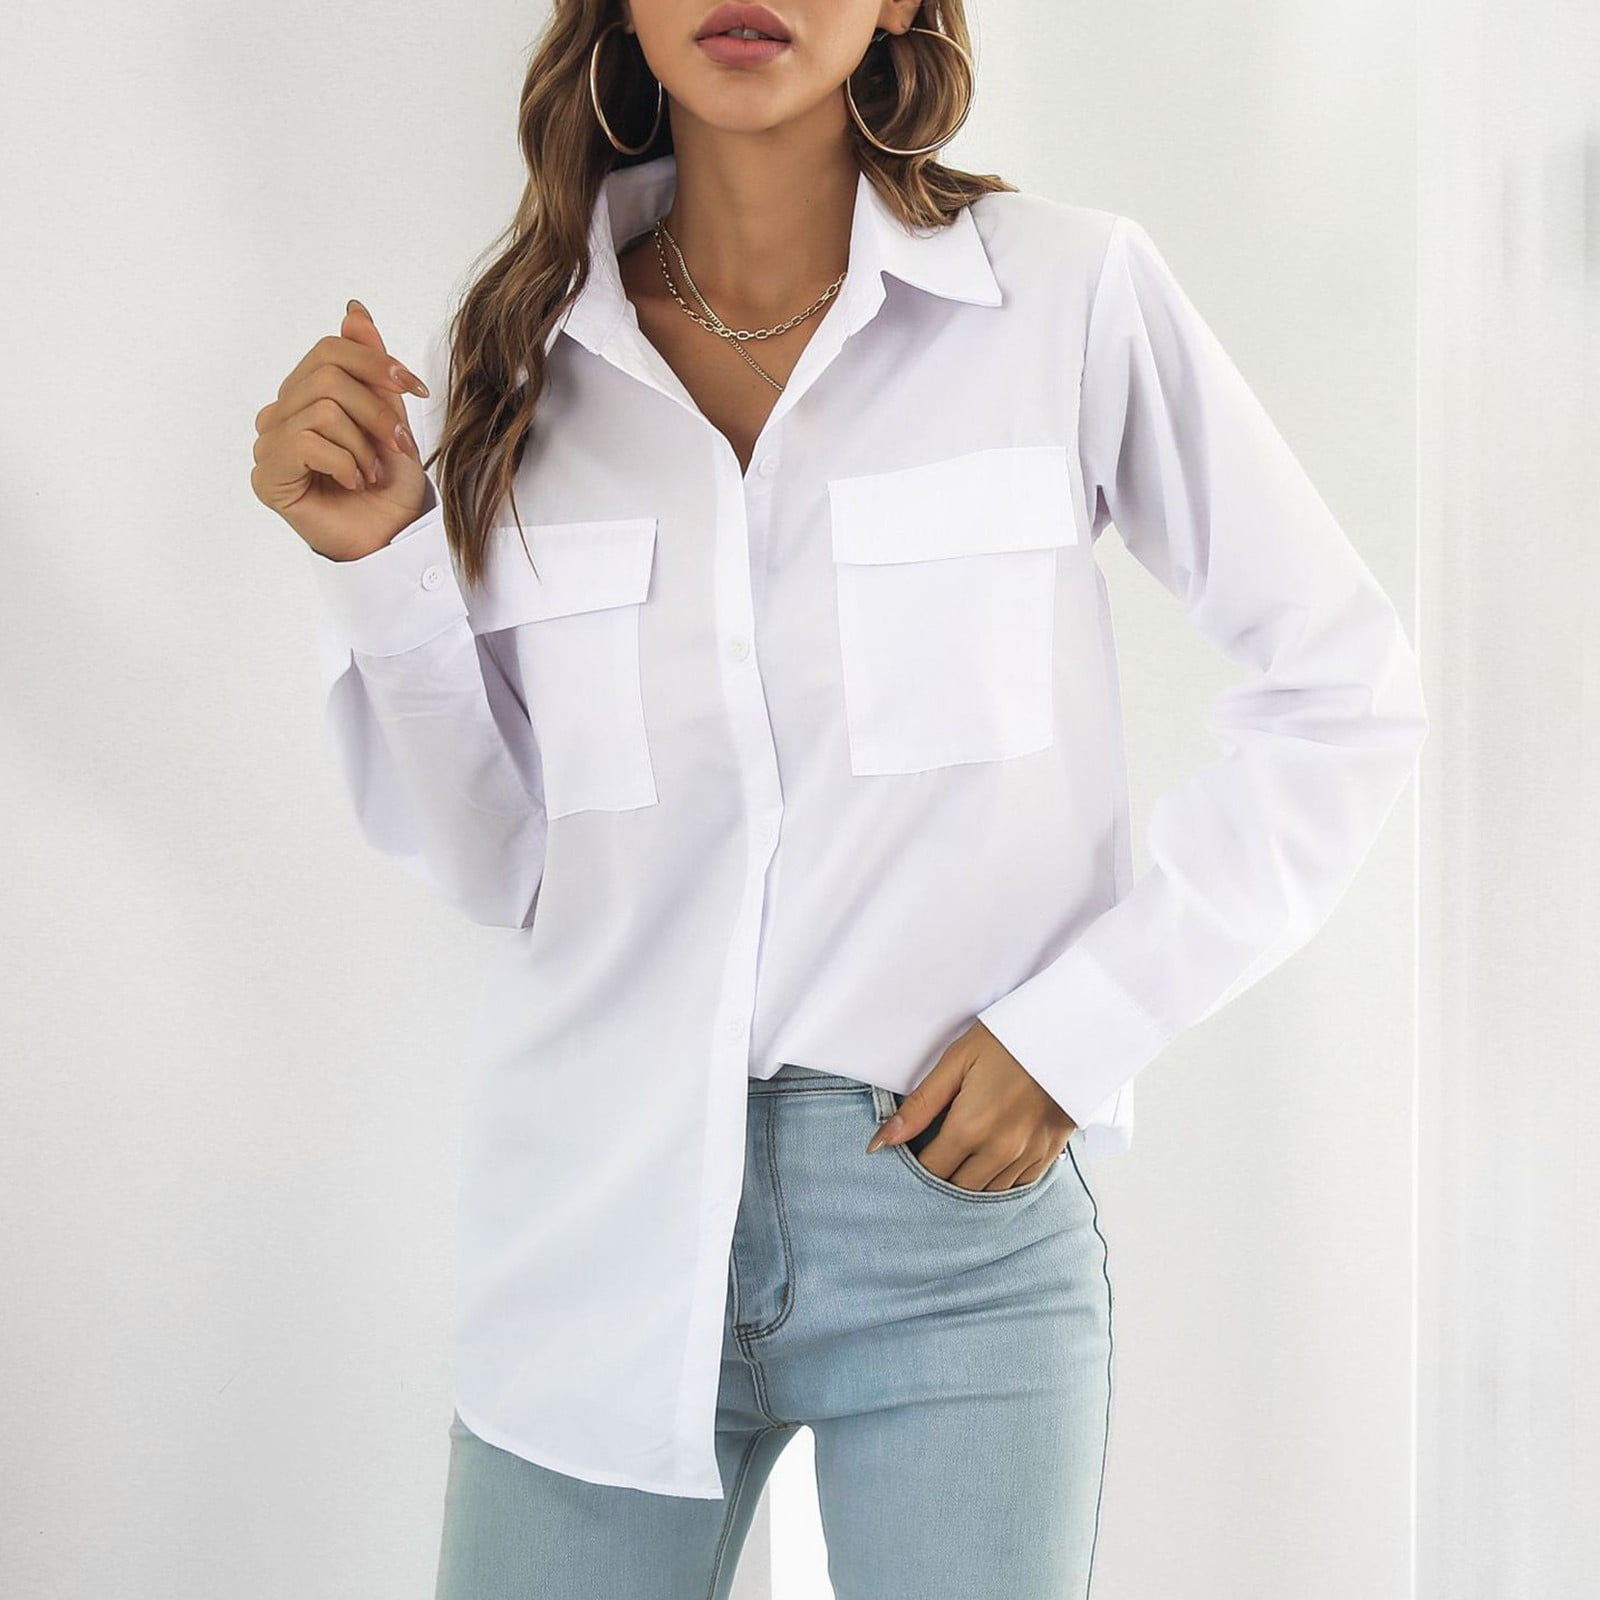 Women's Blouses Elegant Plain Top Stand Collar Fake Buttons Long Sleeve  White S 